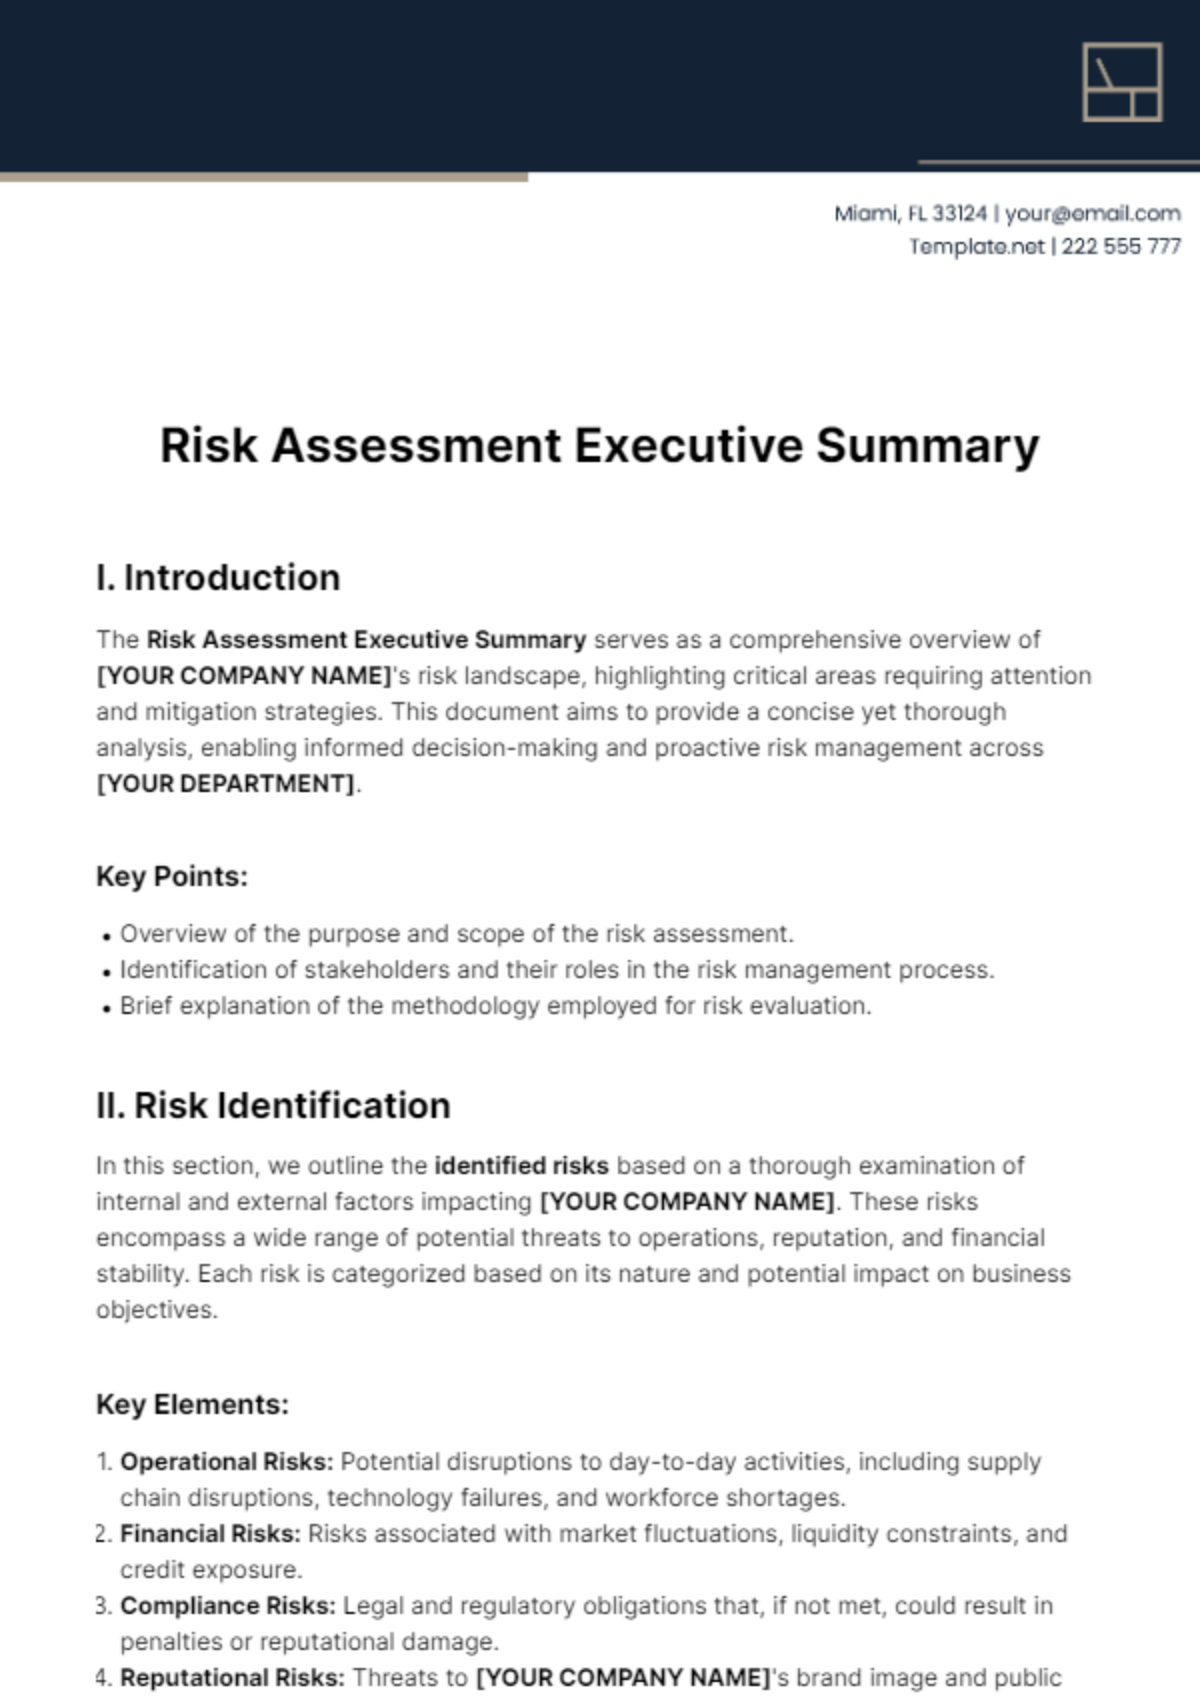 Risk Assessment Executive Summary Template